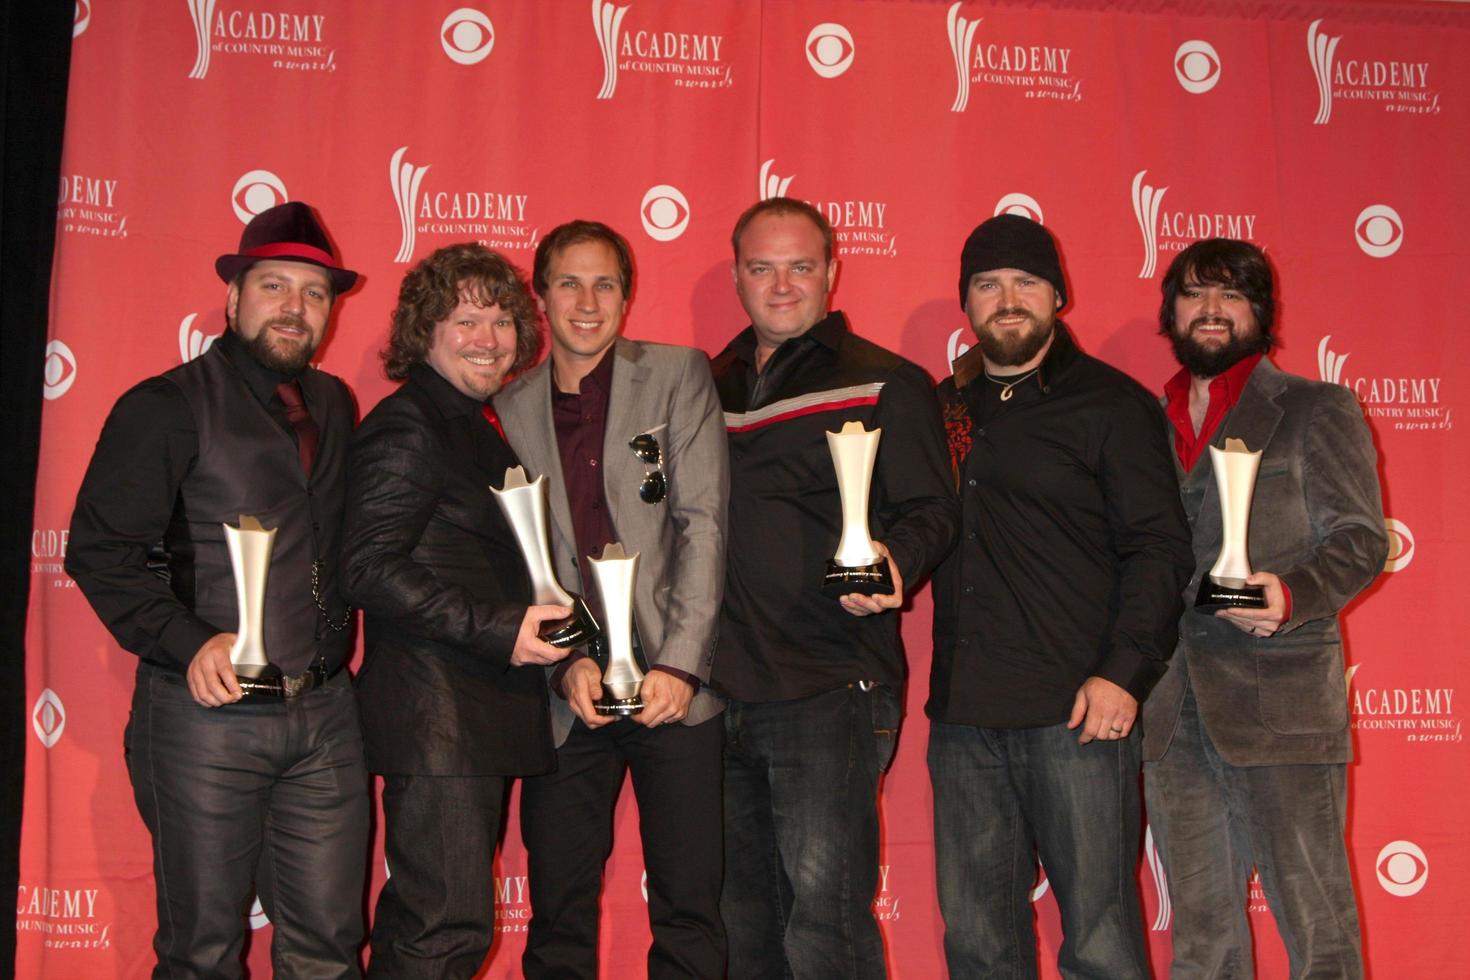 Zac Brown Band in the Press Room at the 44th Academy of Country Music Awards at the MGM Grand Arena in Las Vegas, NV on April 5, 2009 photo